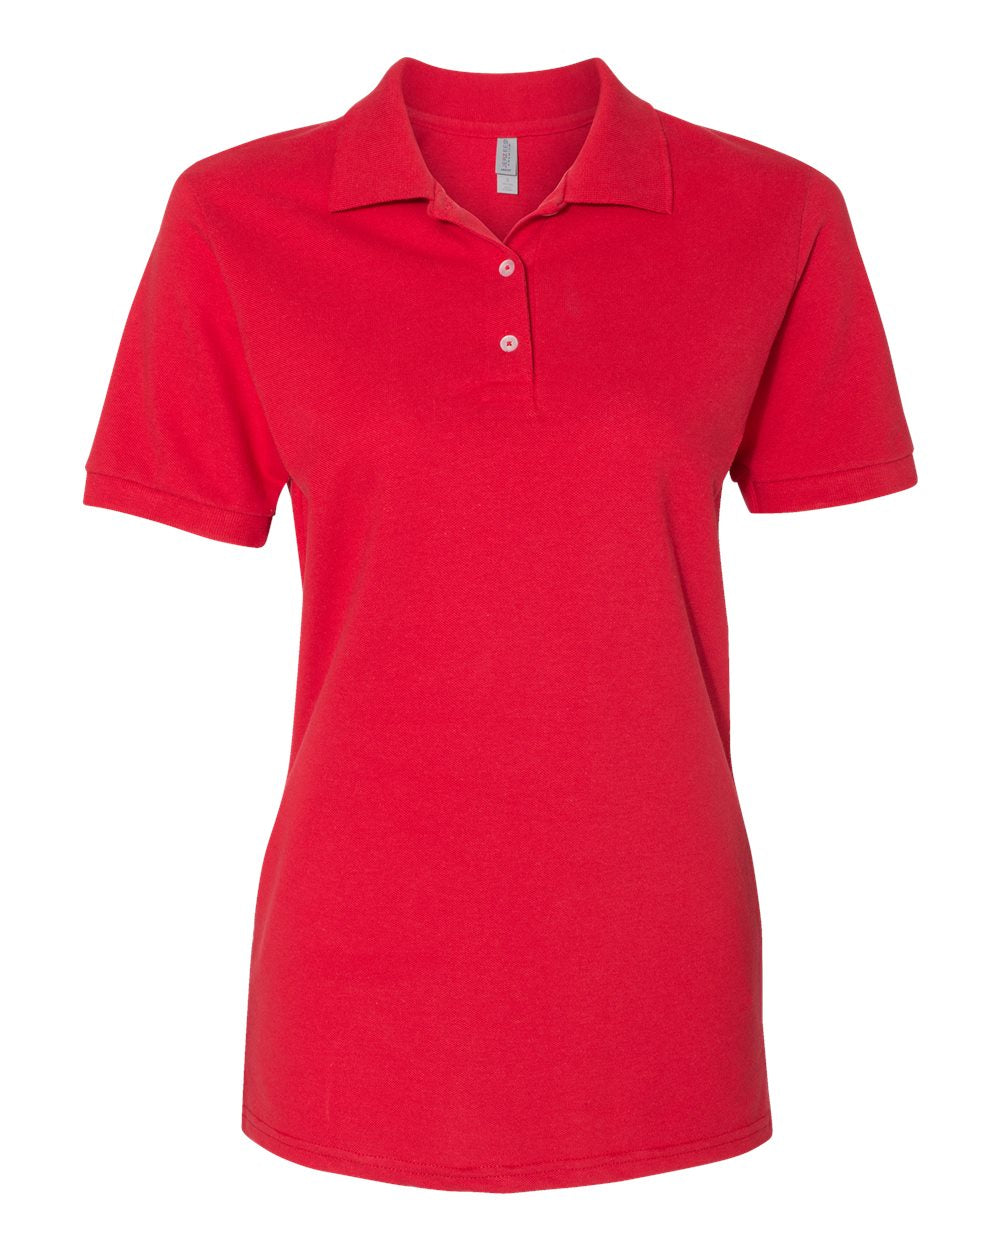 womans jerzees ringspun cotton polo true red